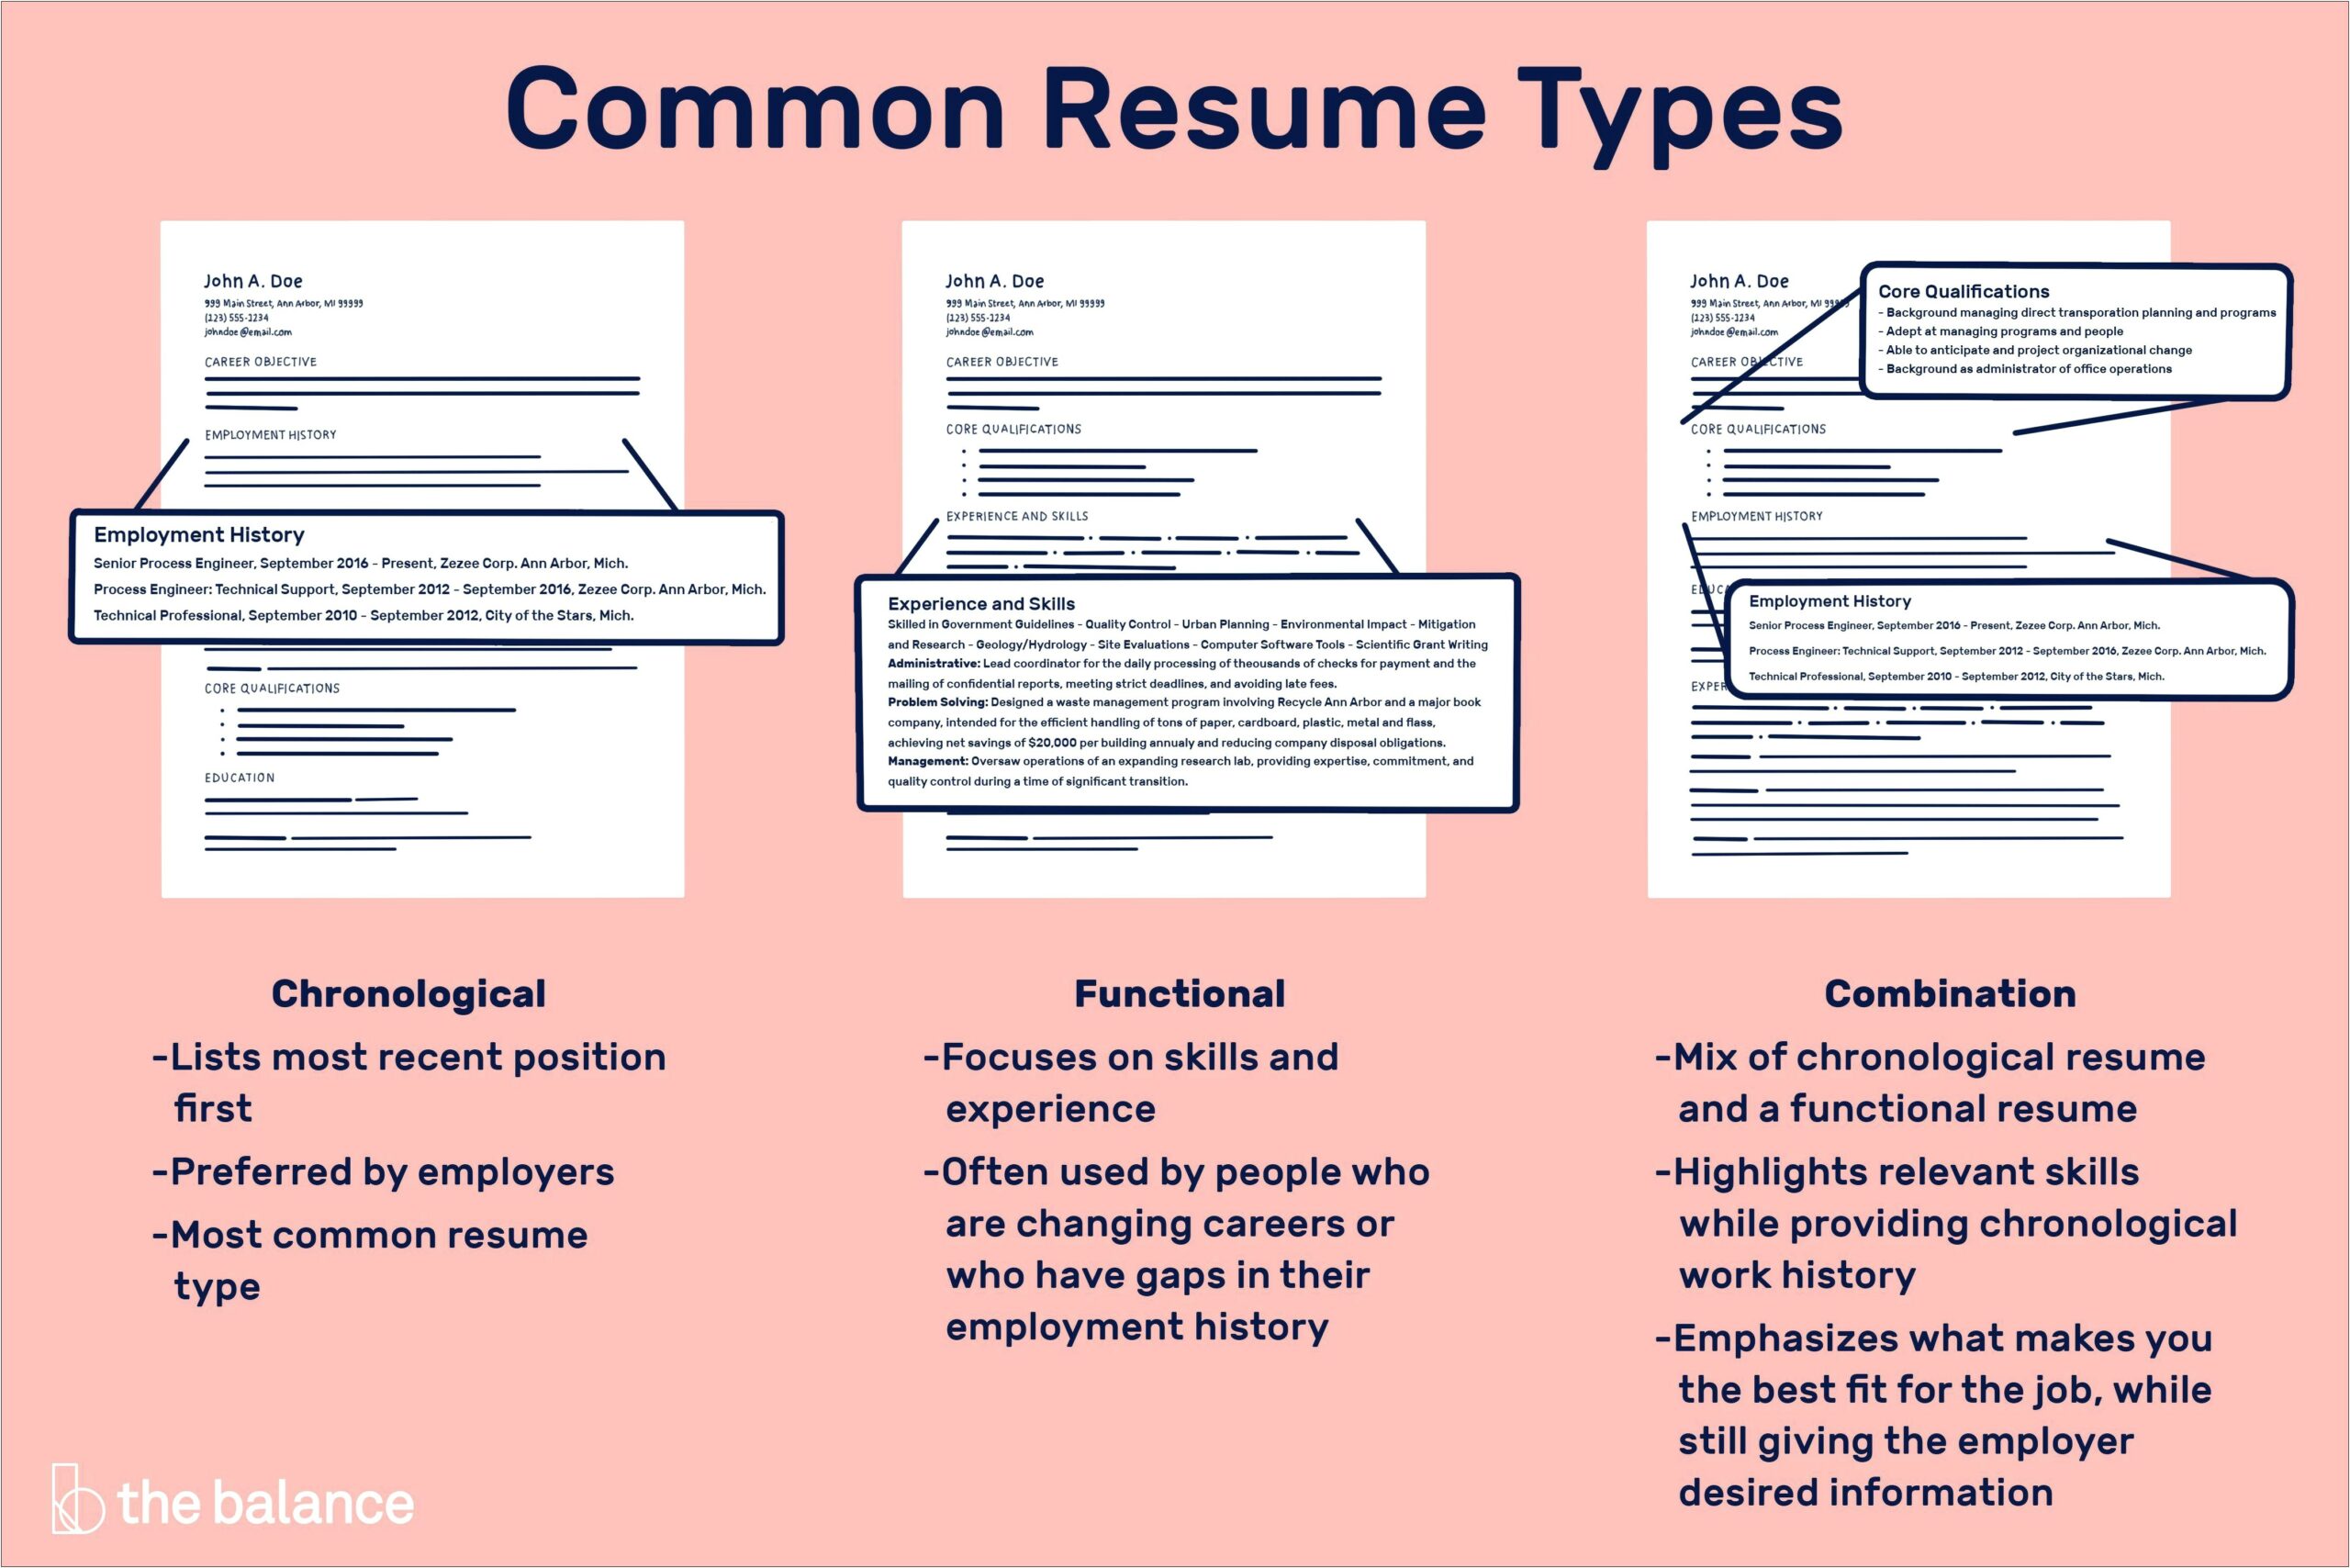 Examples Of Work Skills To List On Resume